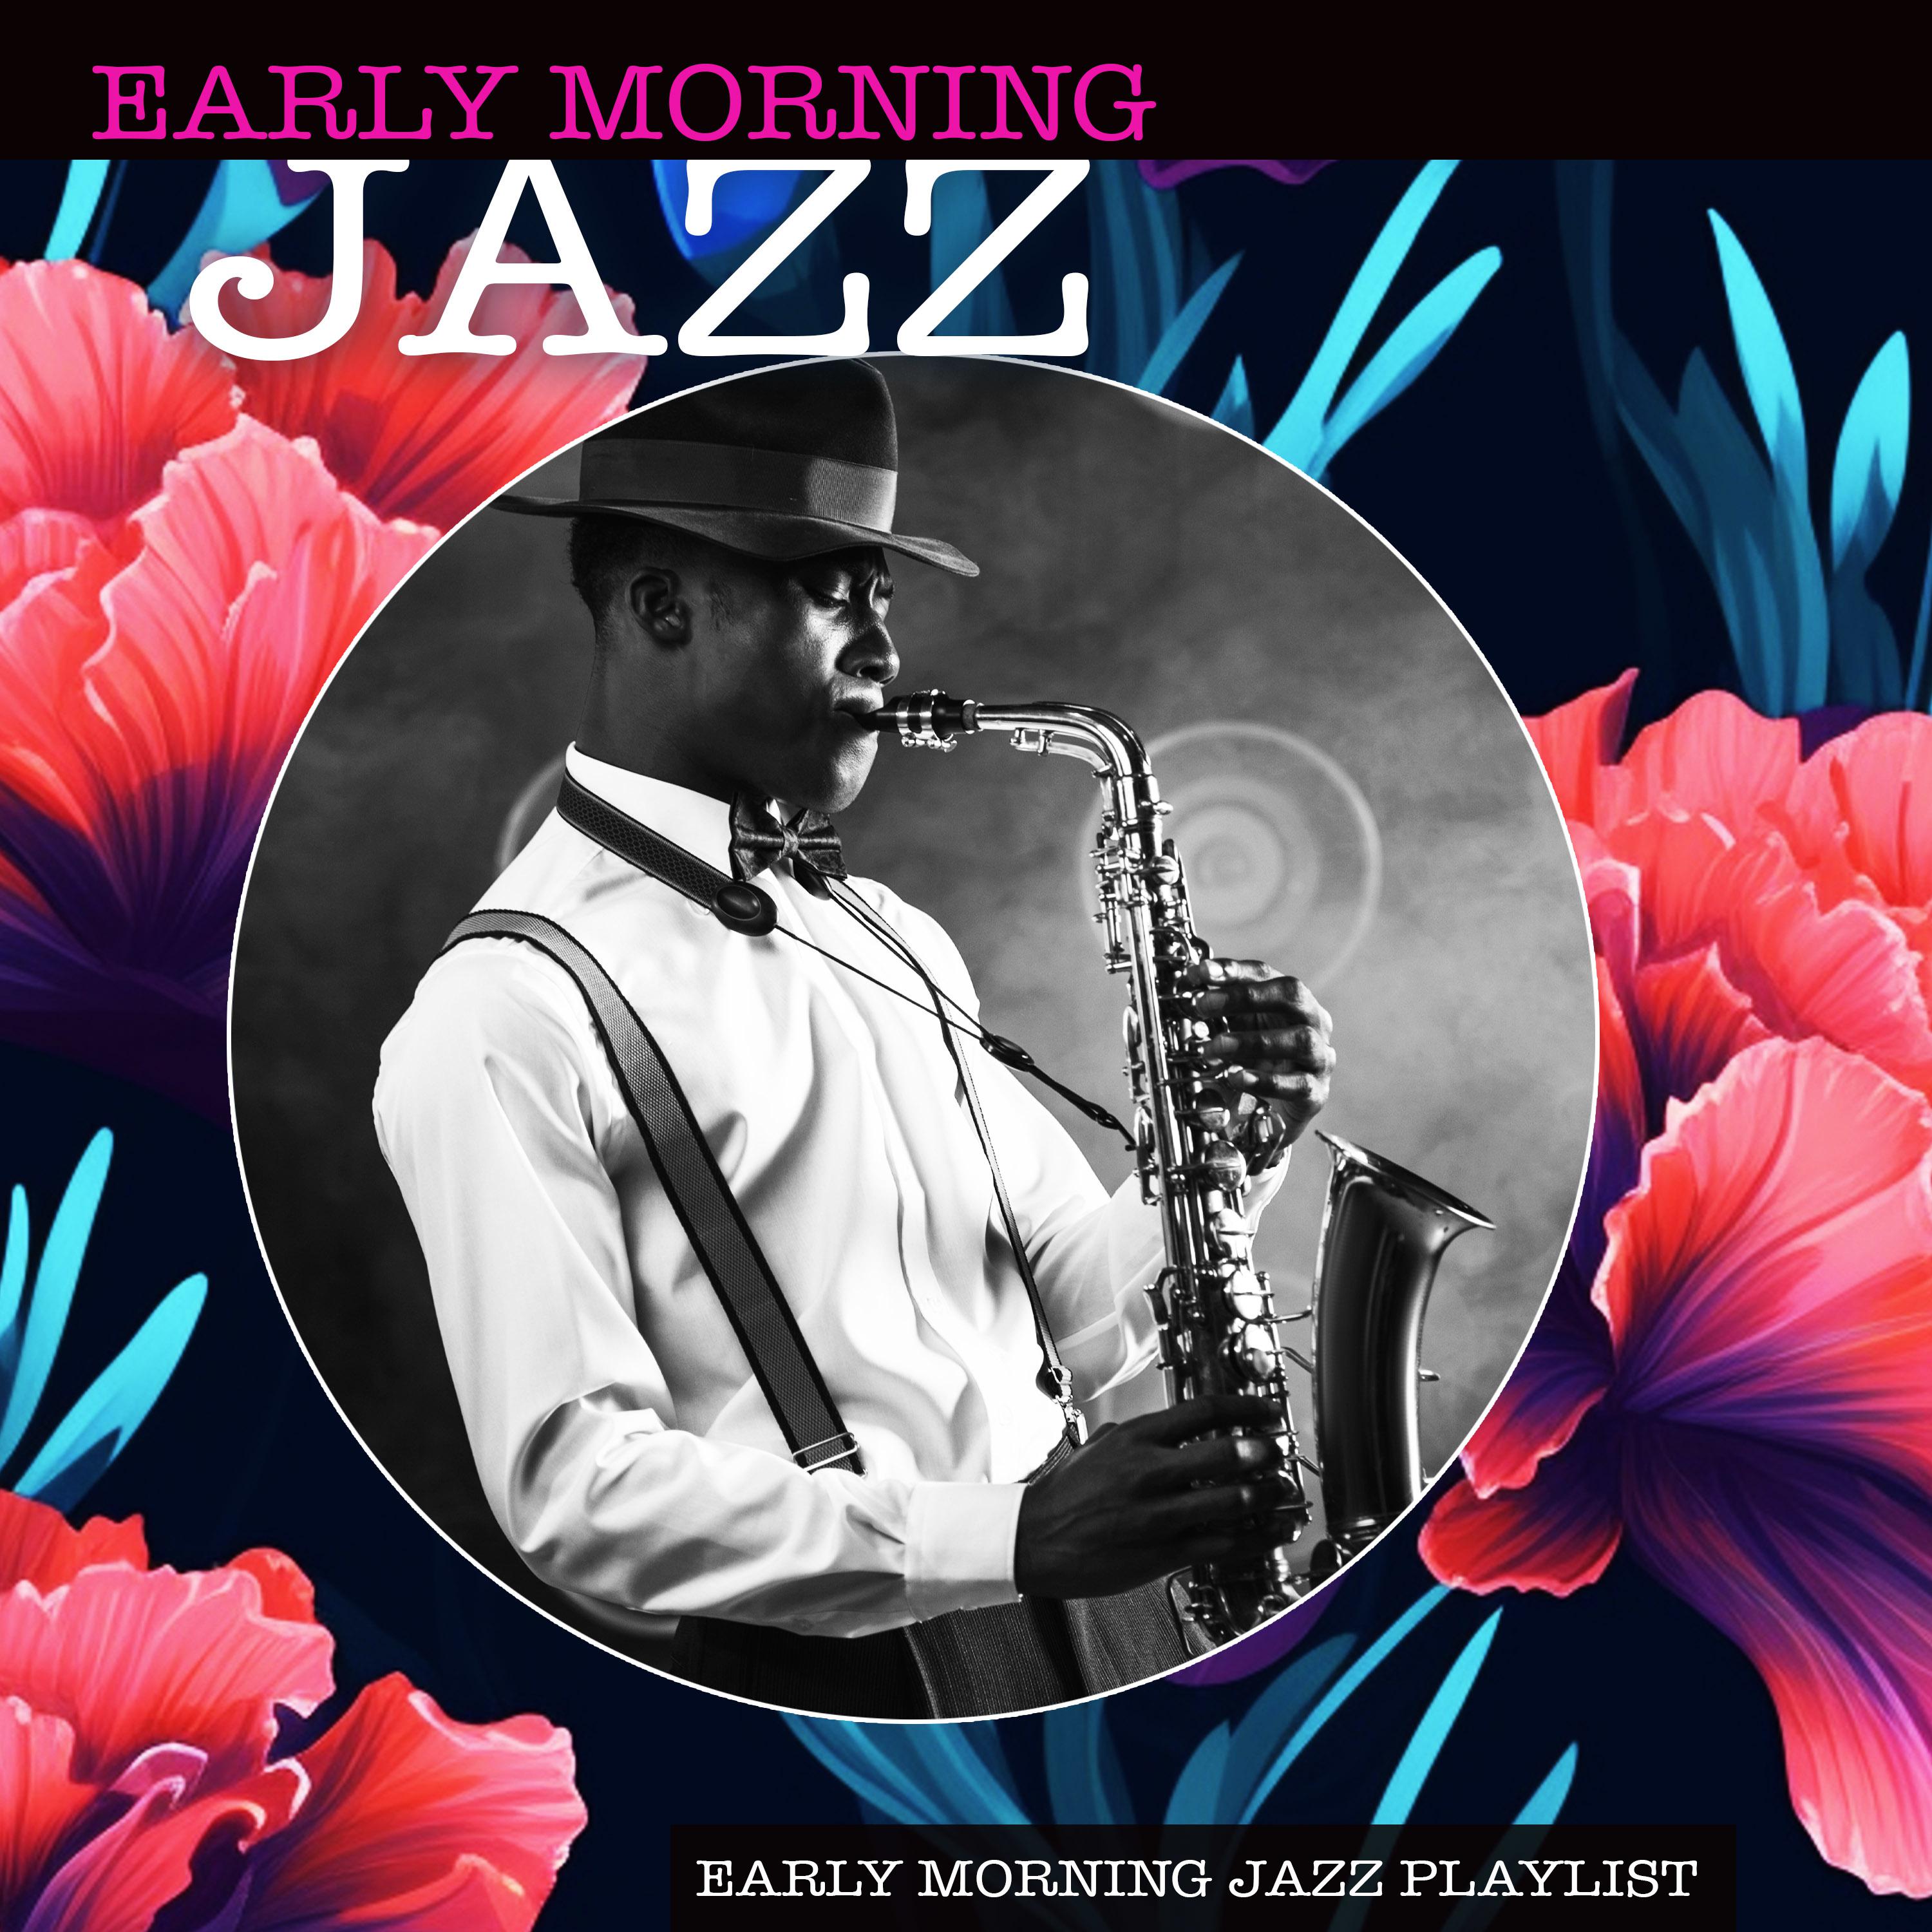 Early Morning Jazz Playlist - Ring Fashioned